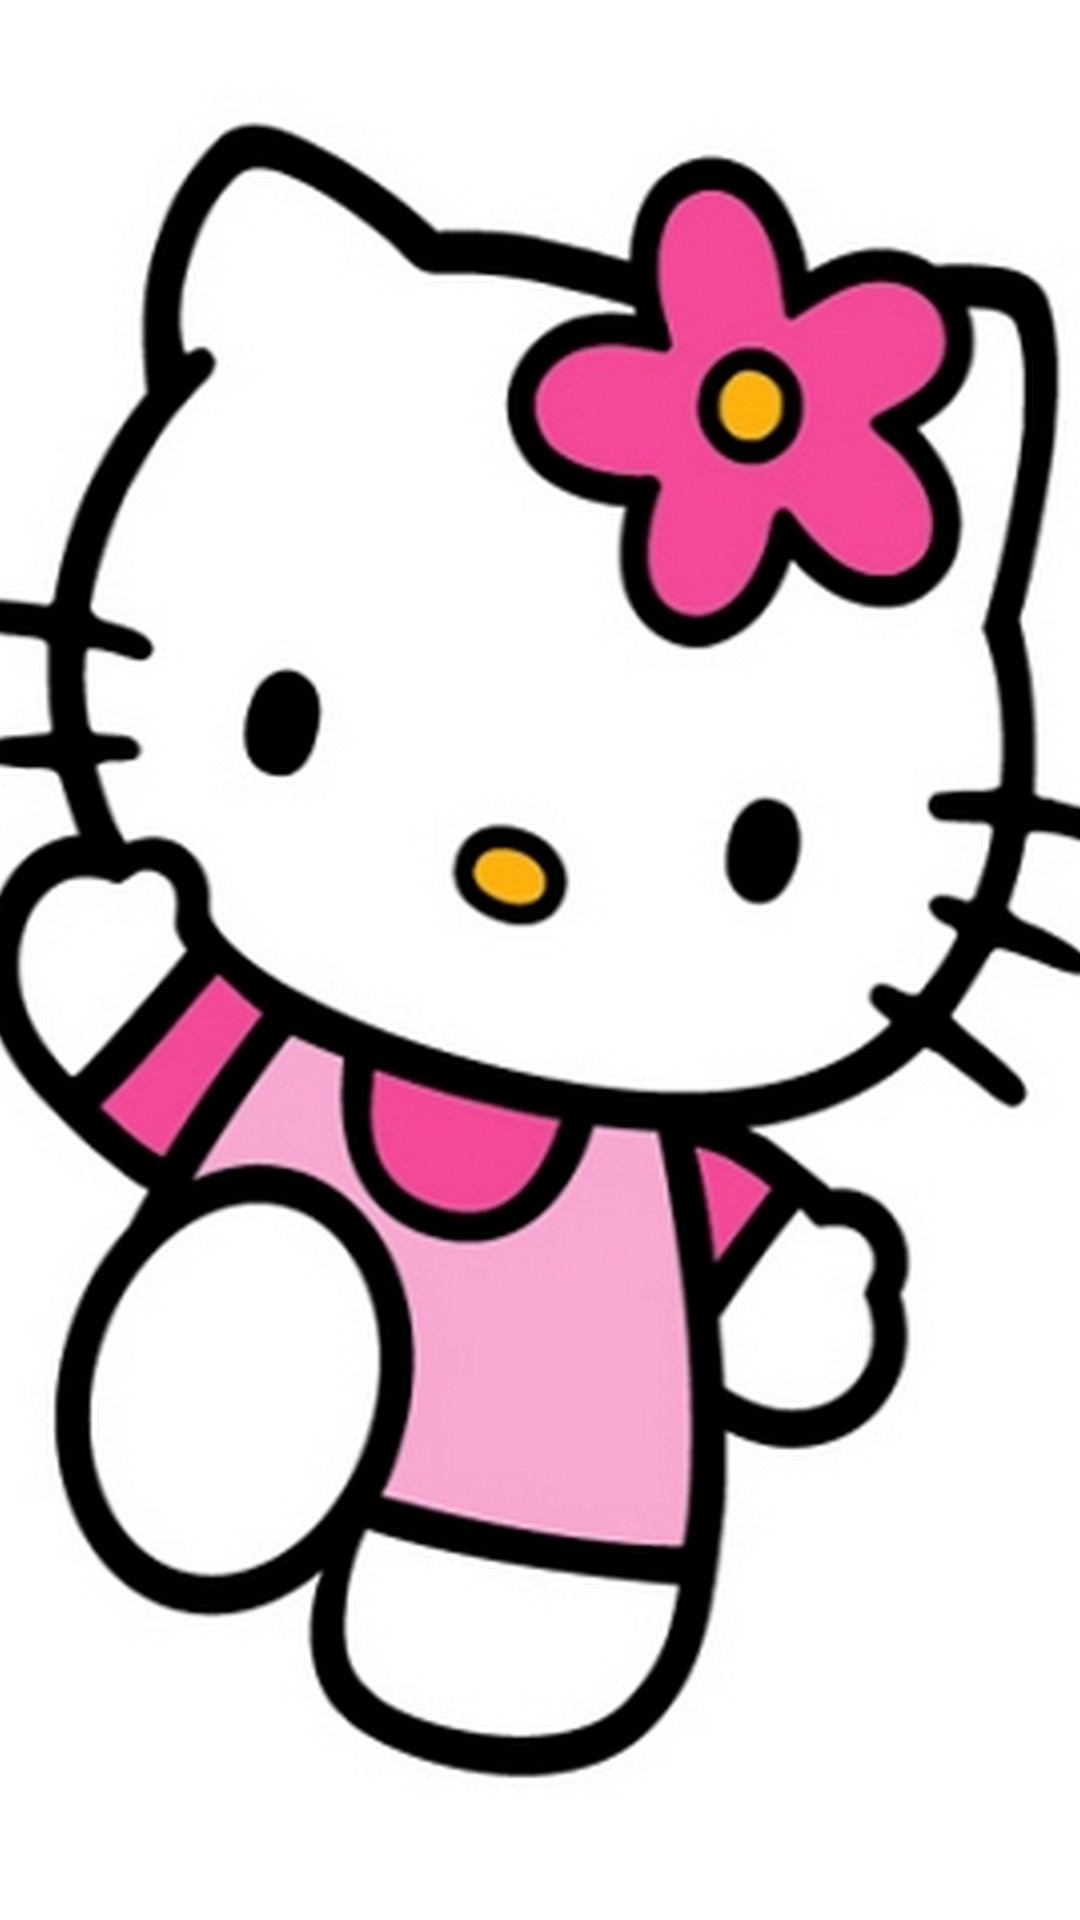 Wallpaper Hello Kitty Mobile With Image Resolution - Hello Kitty - HD Wallpaper 